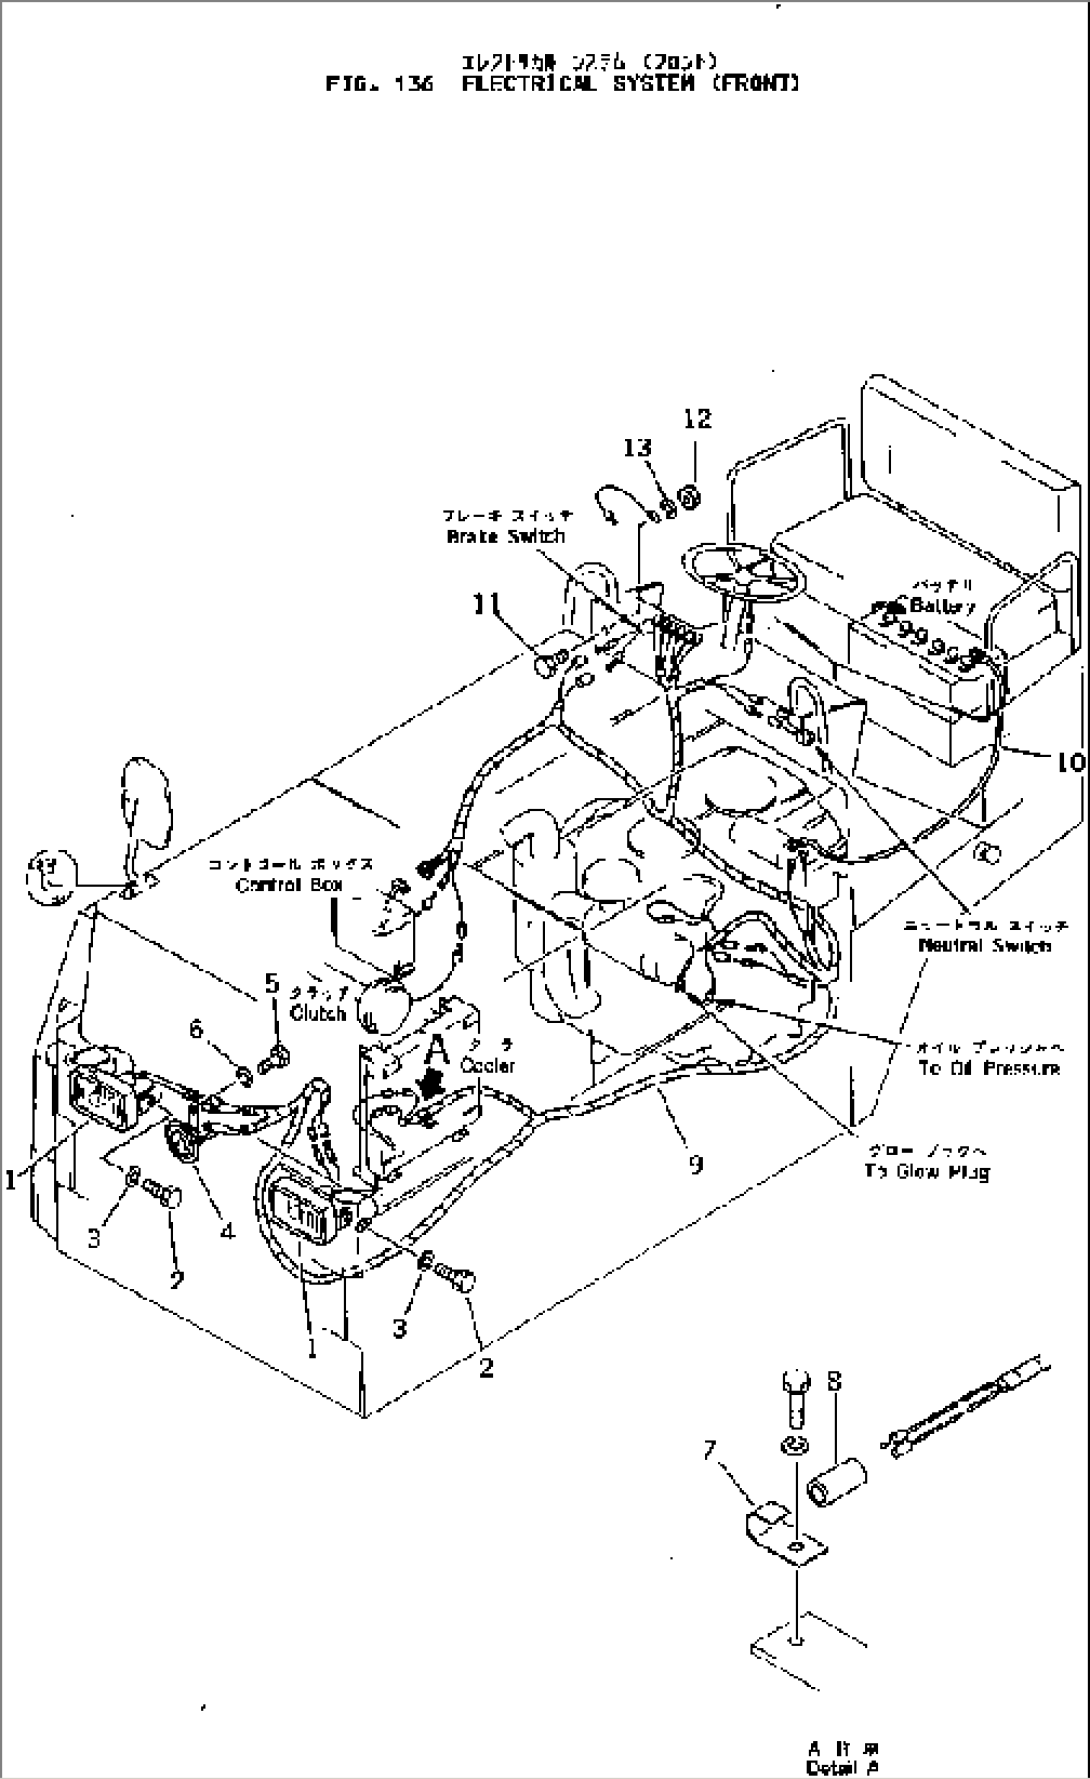 ELECTRICAL SYSTEM (FRONT)